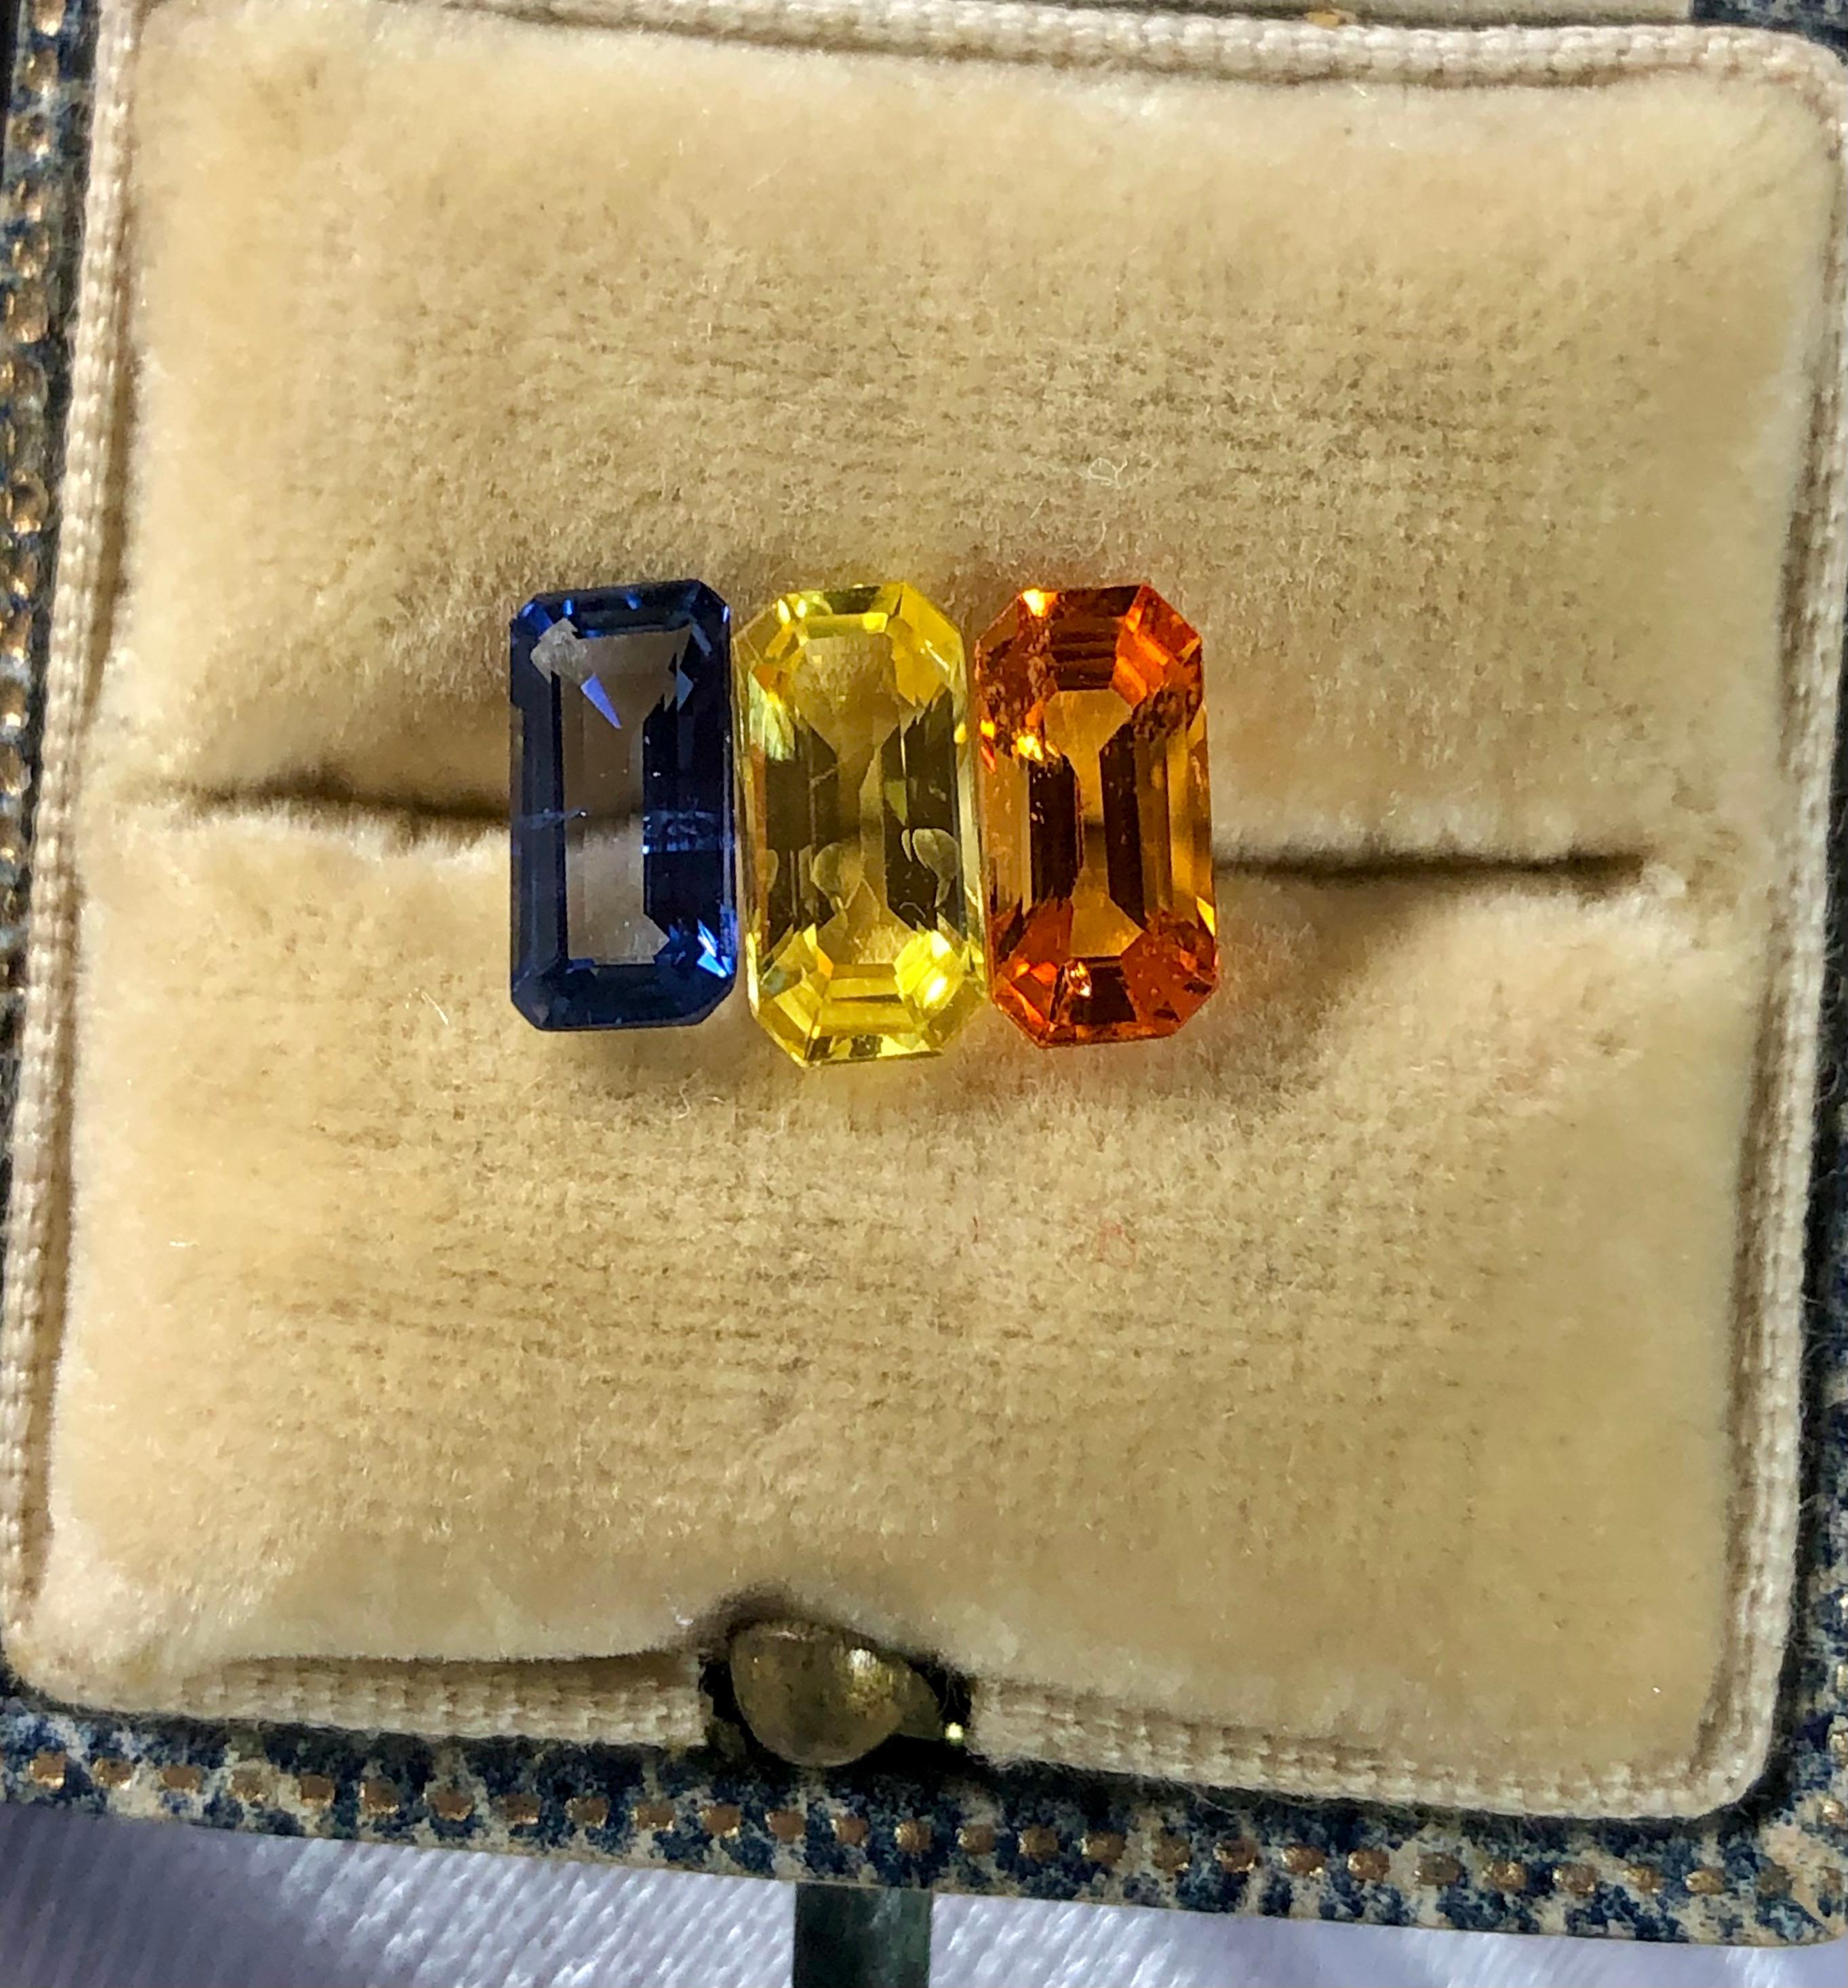 Multicolor Three stone Ceylon sapphires high-quality emerald cut.  Yellow sapphire 1.12 carats, Orange vibrant 1.09 carats, and blue sapphires weighing 0.98 carats.  **these incredible gemstones are available to purchase as loose stones or